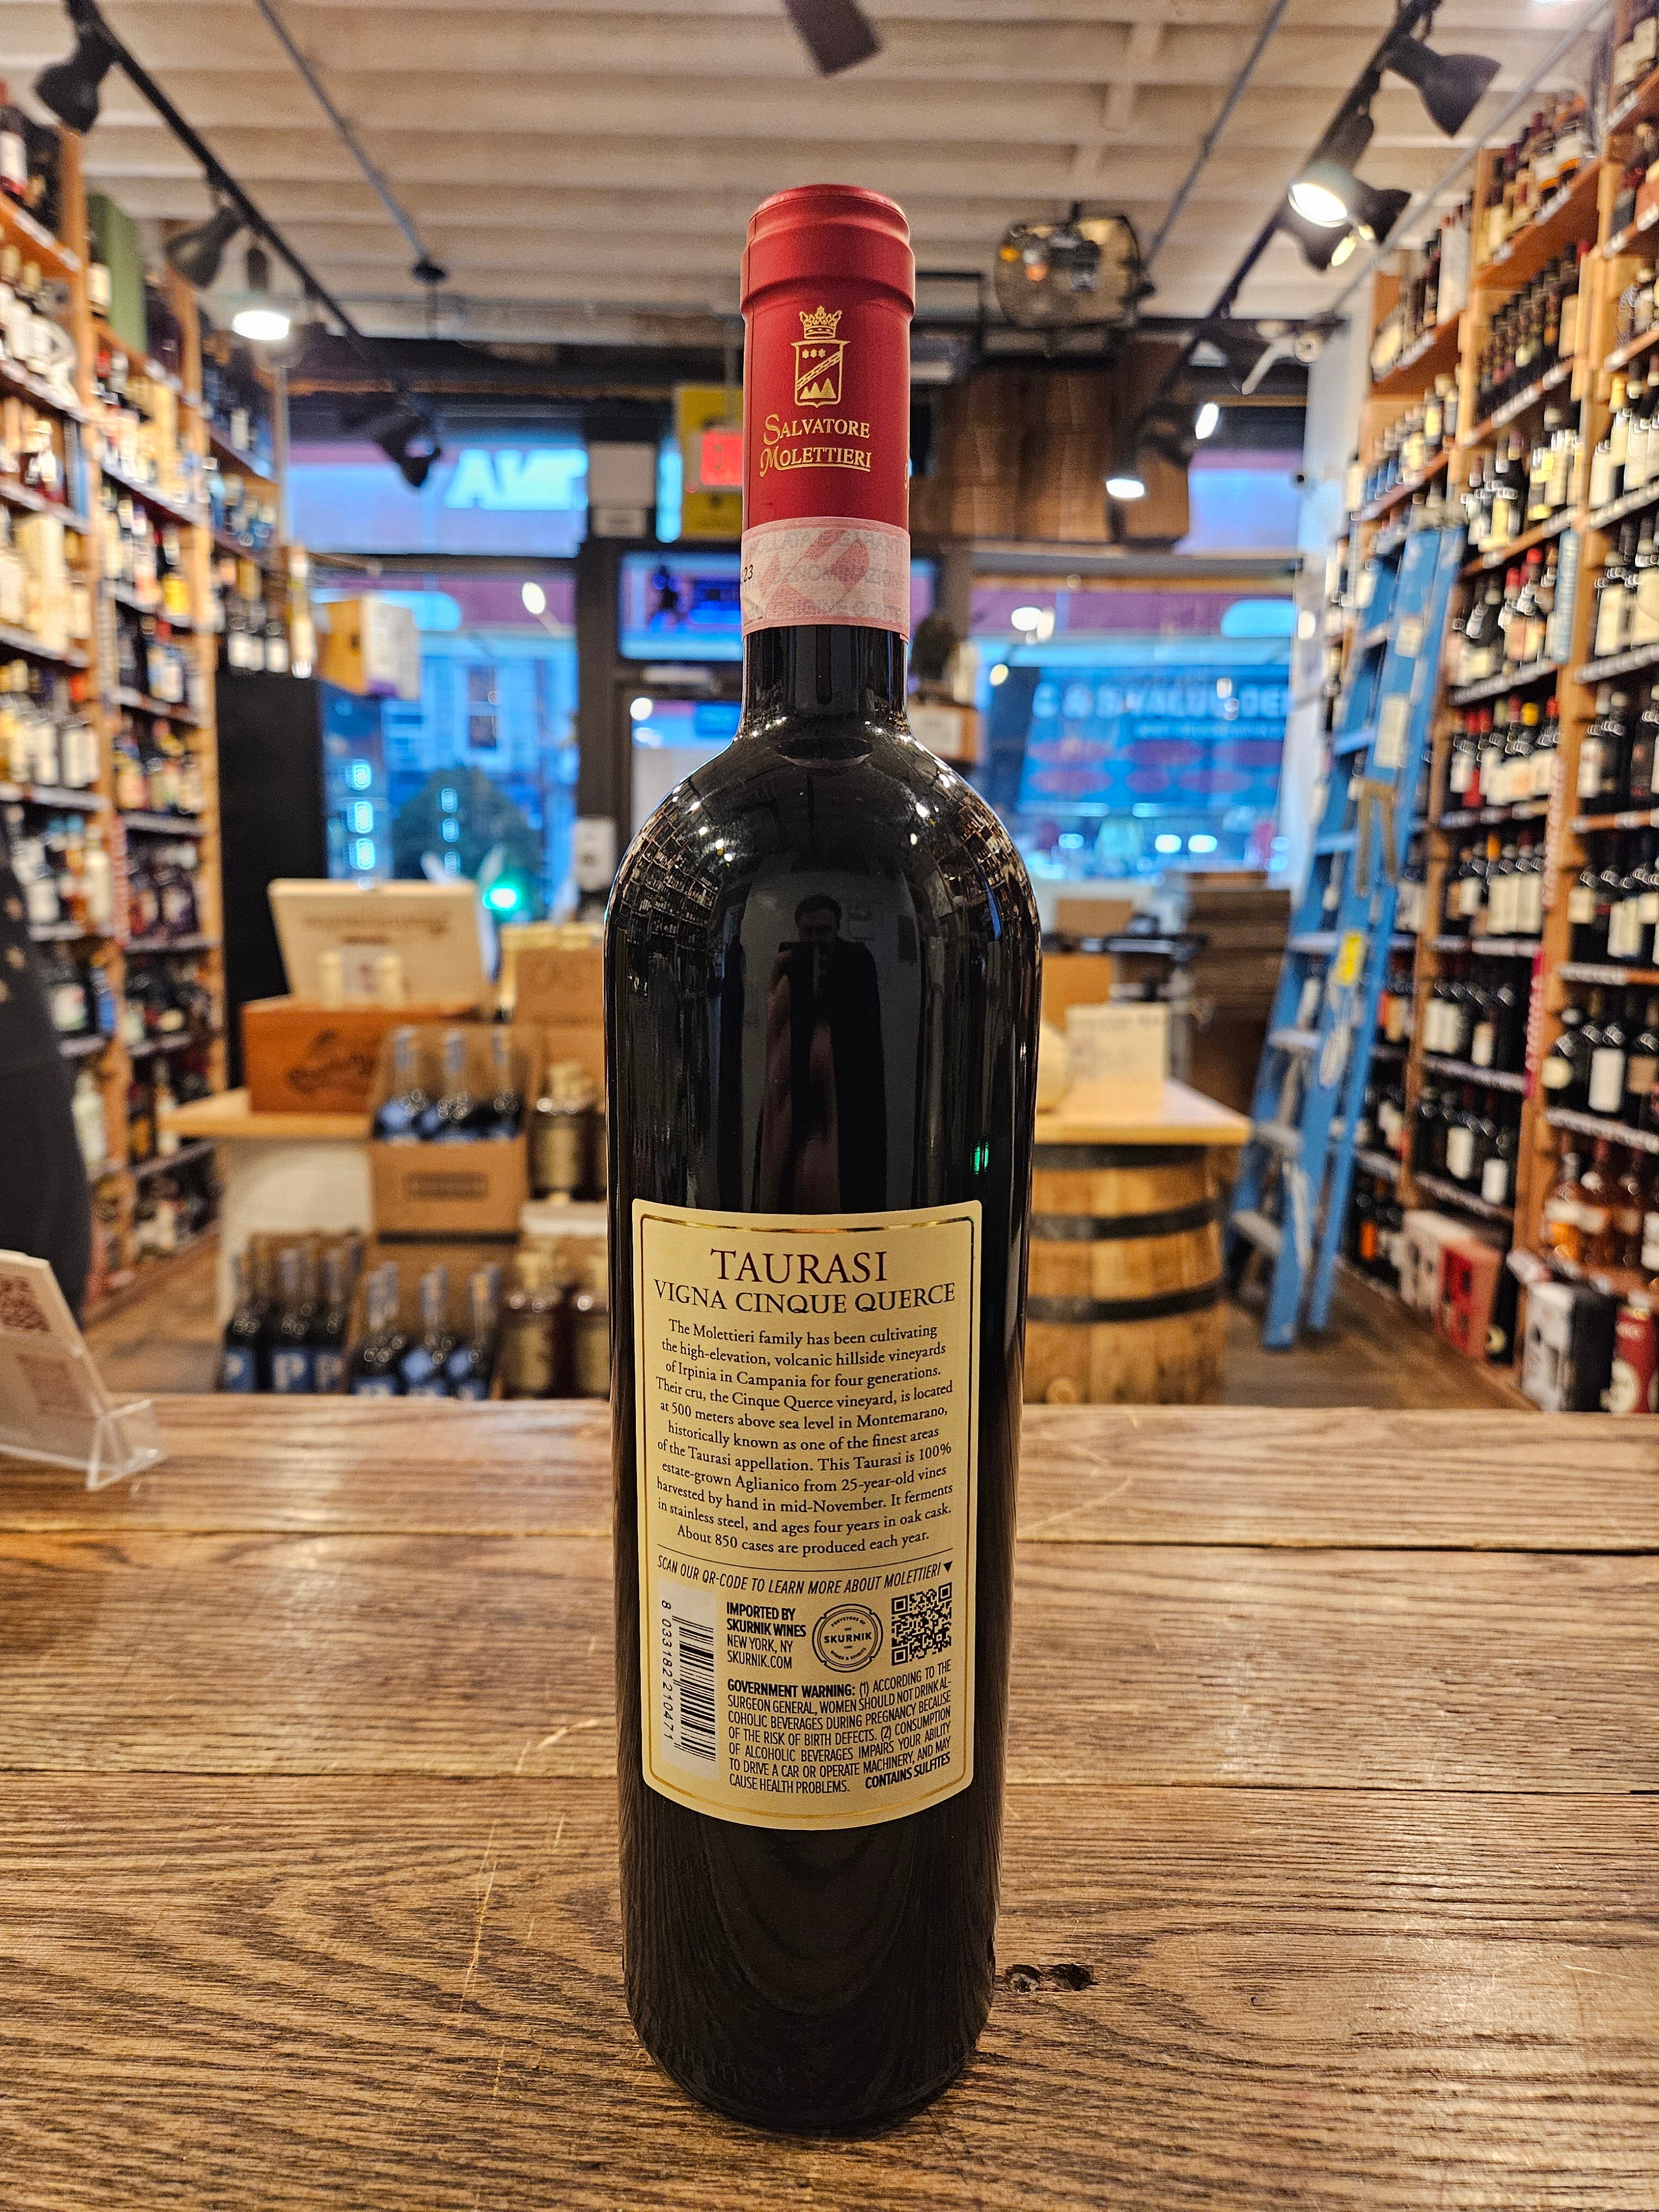 Taurasi Vigna Cinque Querce 750mL backside of tall slim dark wine bottle with a red and white label and red top